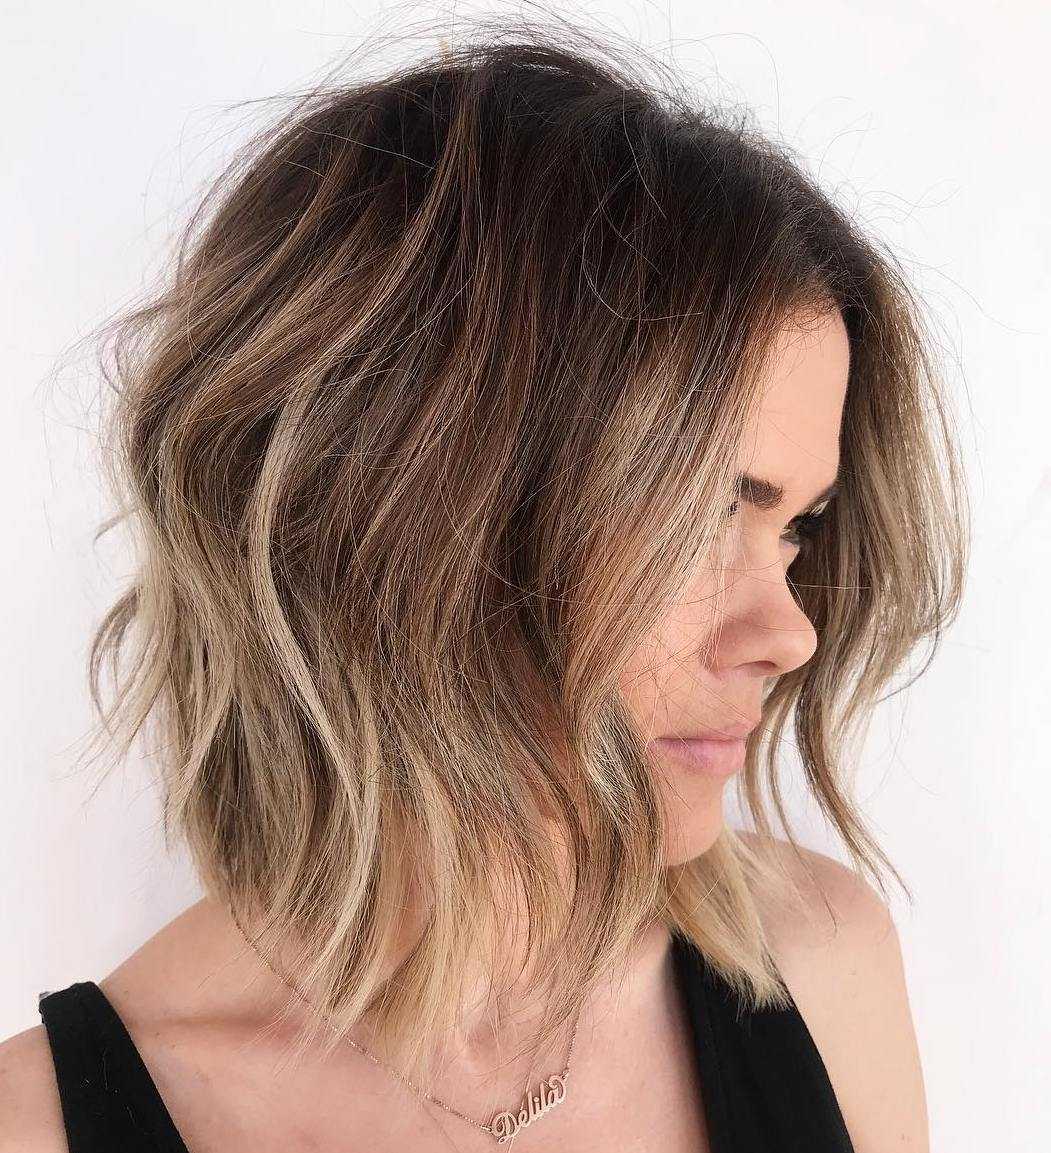 30 Hottest Trends for Brown Hair with Highlights to Nail in 2021